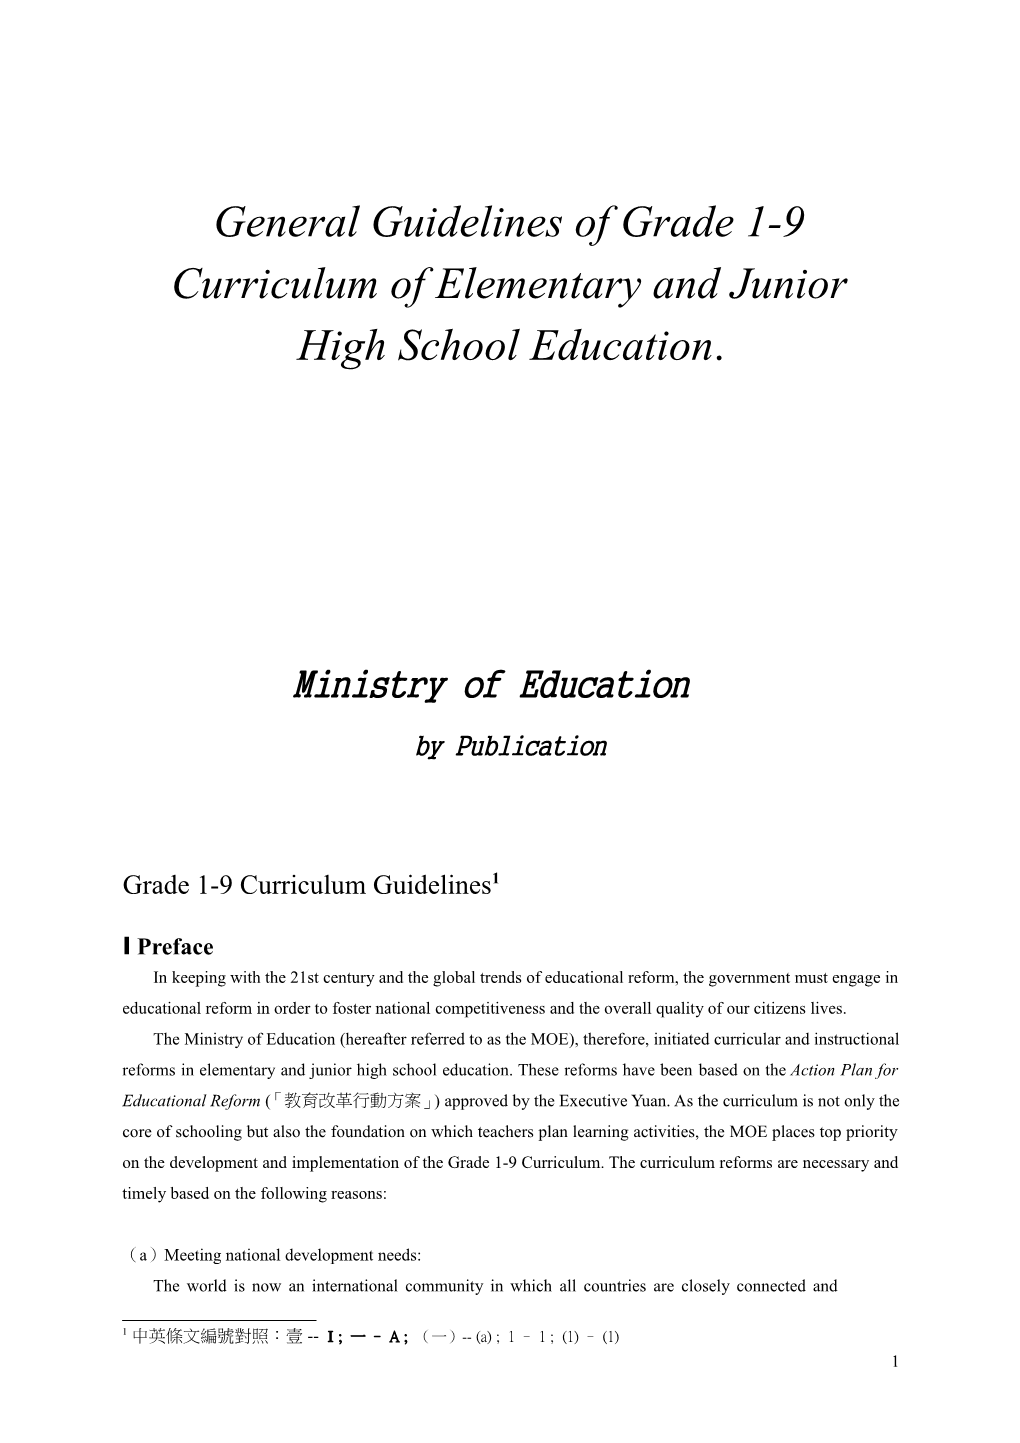 General Guidelines of Grade 1-9 Curriculum of Elementary and Junior High School Education